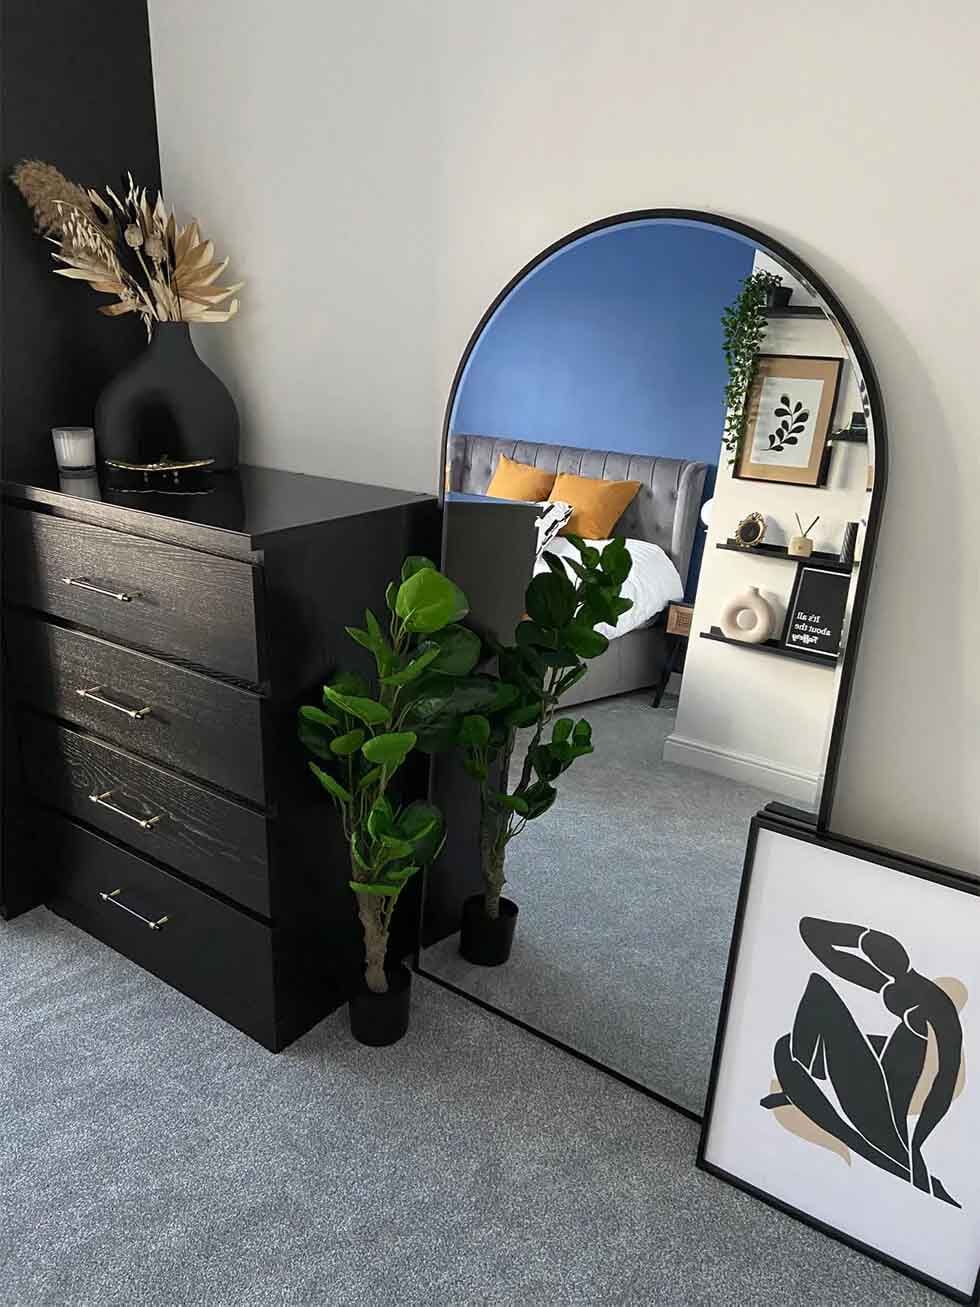 A black chest of drawers next to an arched mirror and a framed abstract art piece